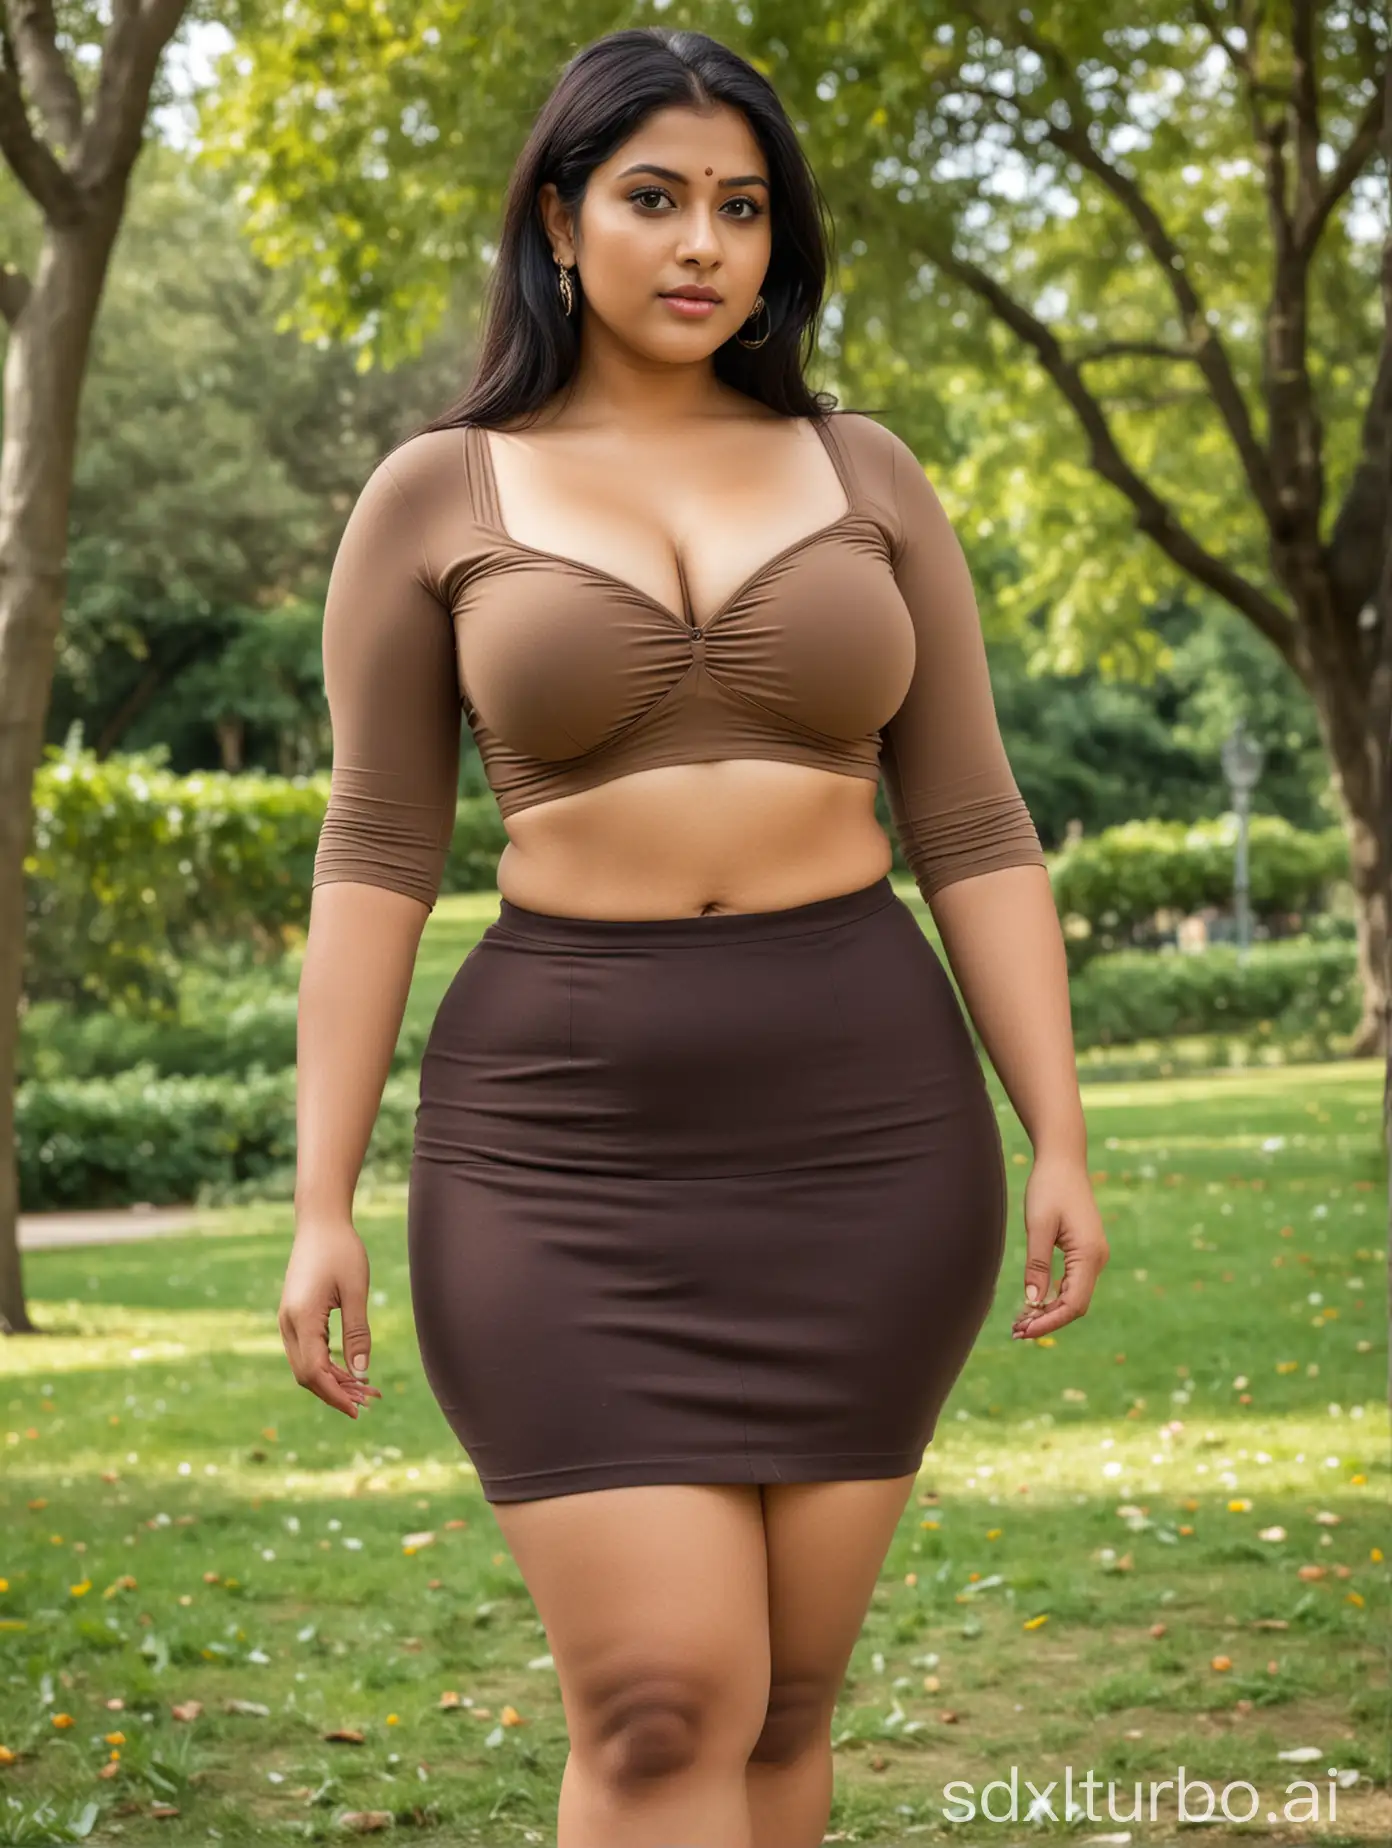 Curvy Indian woman with large breasts, with full feminine figure, wearing a tightest half sleeve mocha colored crop top with plunging neckline and mini skirt, with generous bosom, standing in a crowded park. rear view